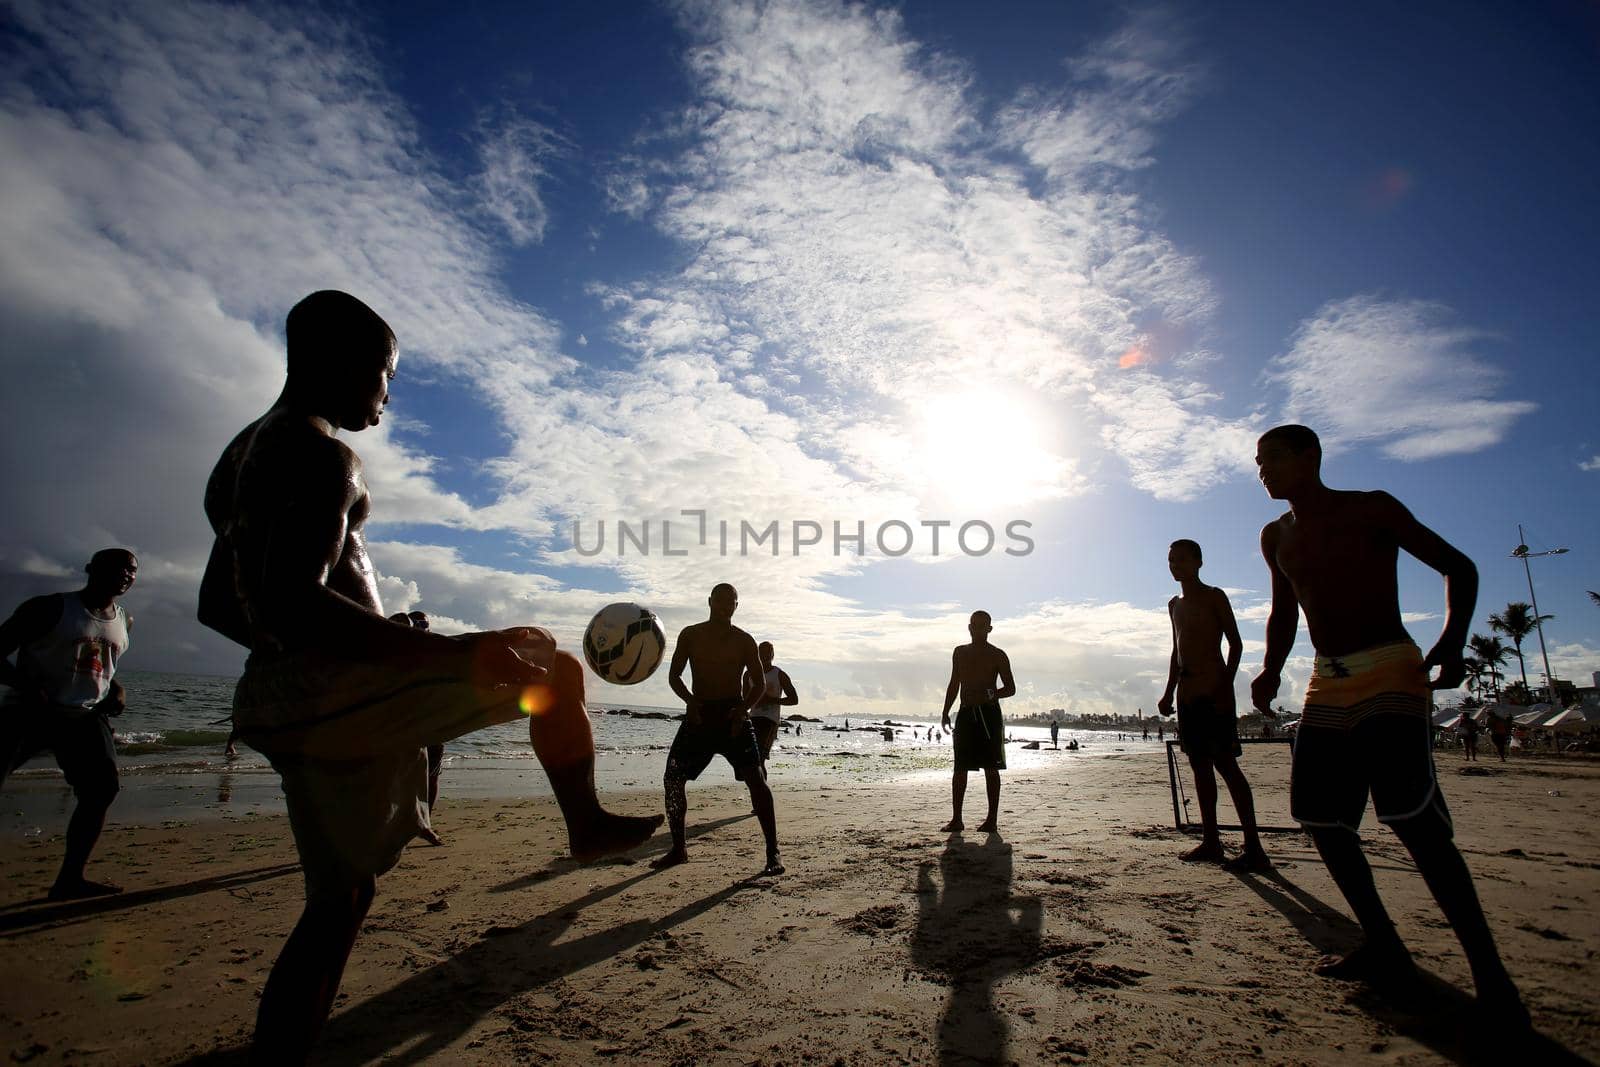 salvador, bahia, brazil - december 22, 2015: Young people are seen playing soccer on Itapua Beach in Salvador